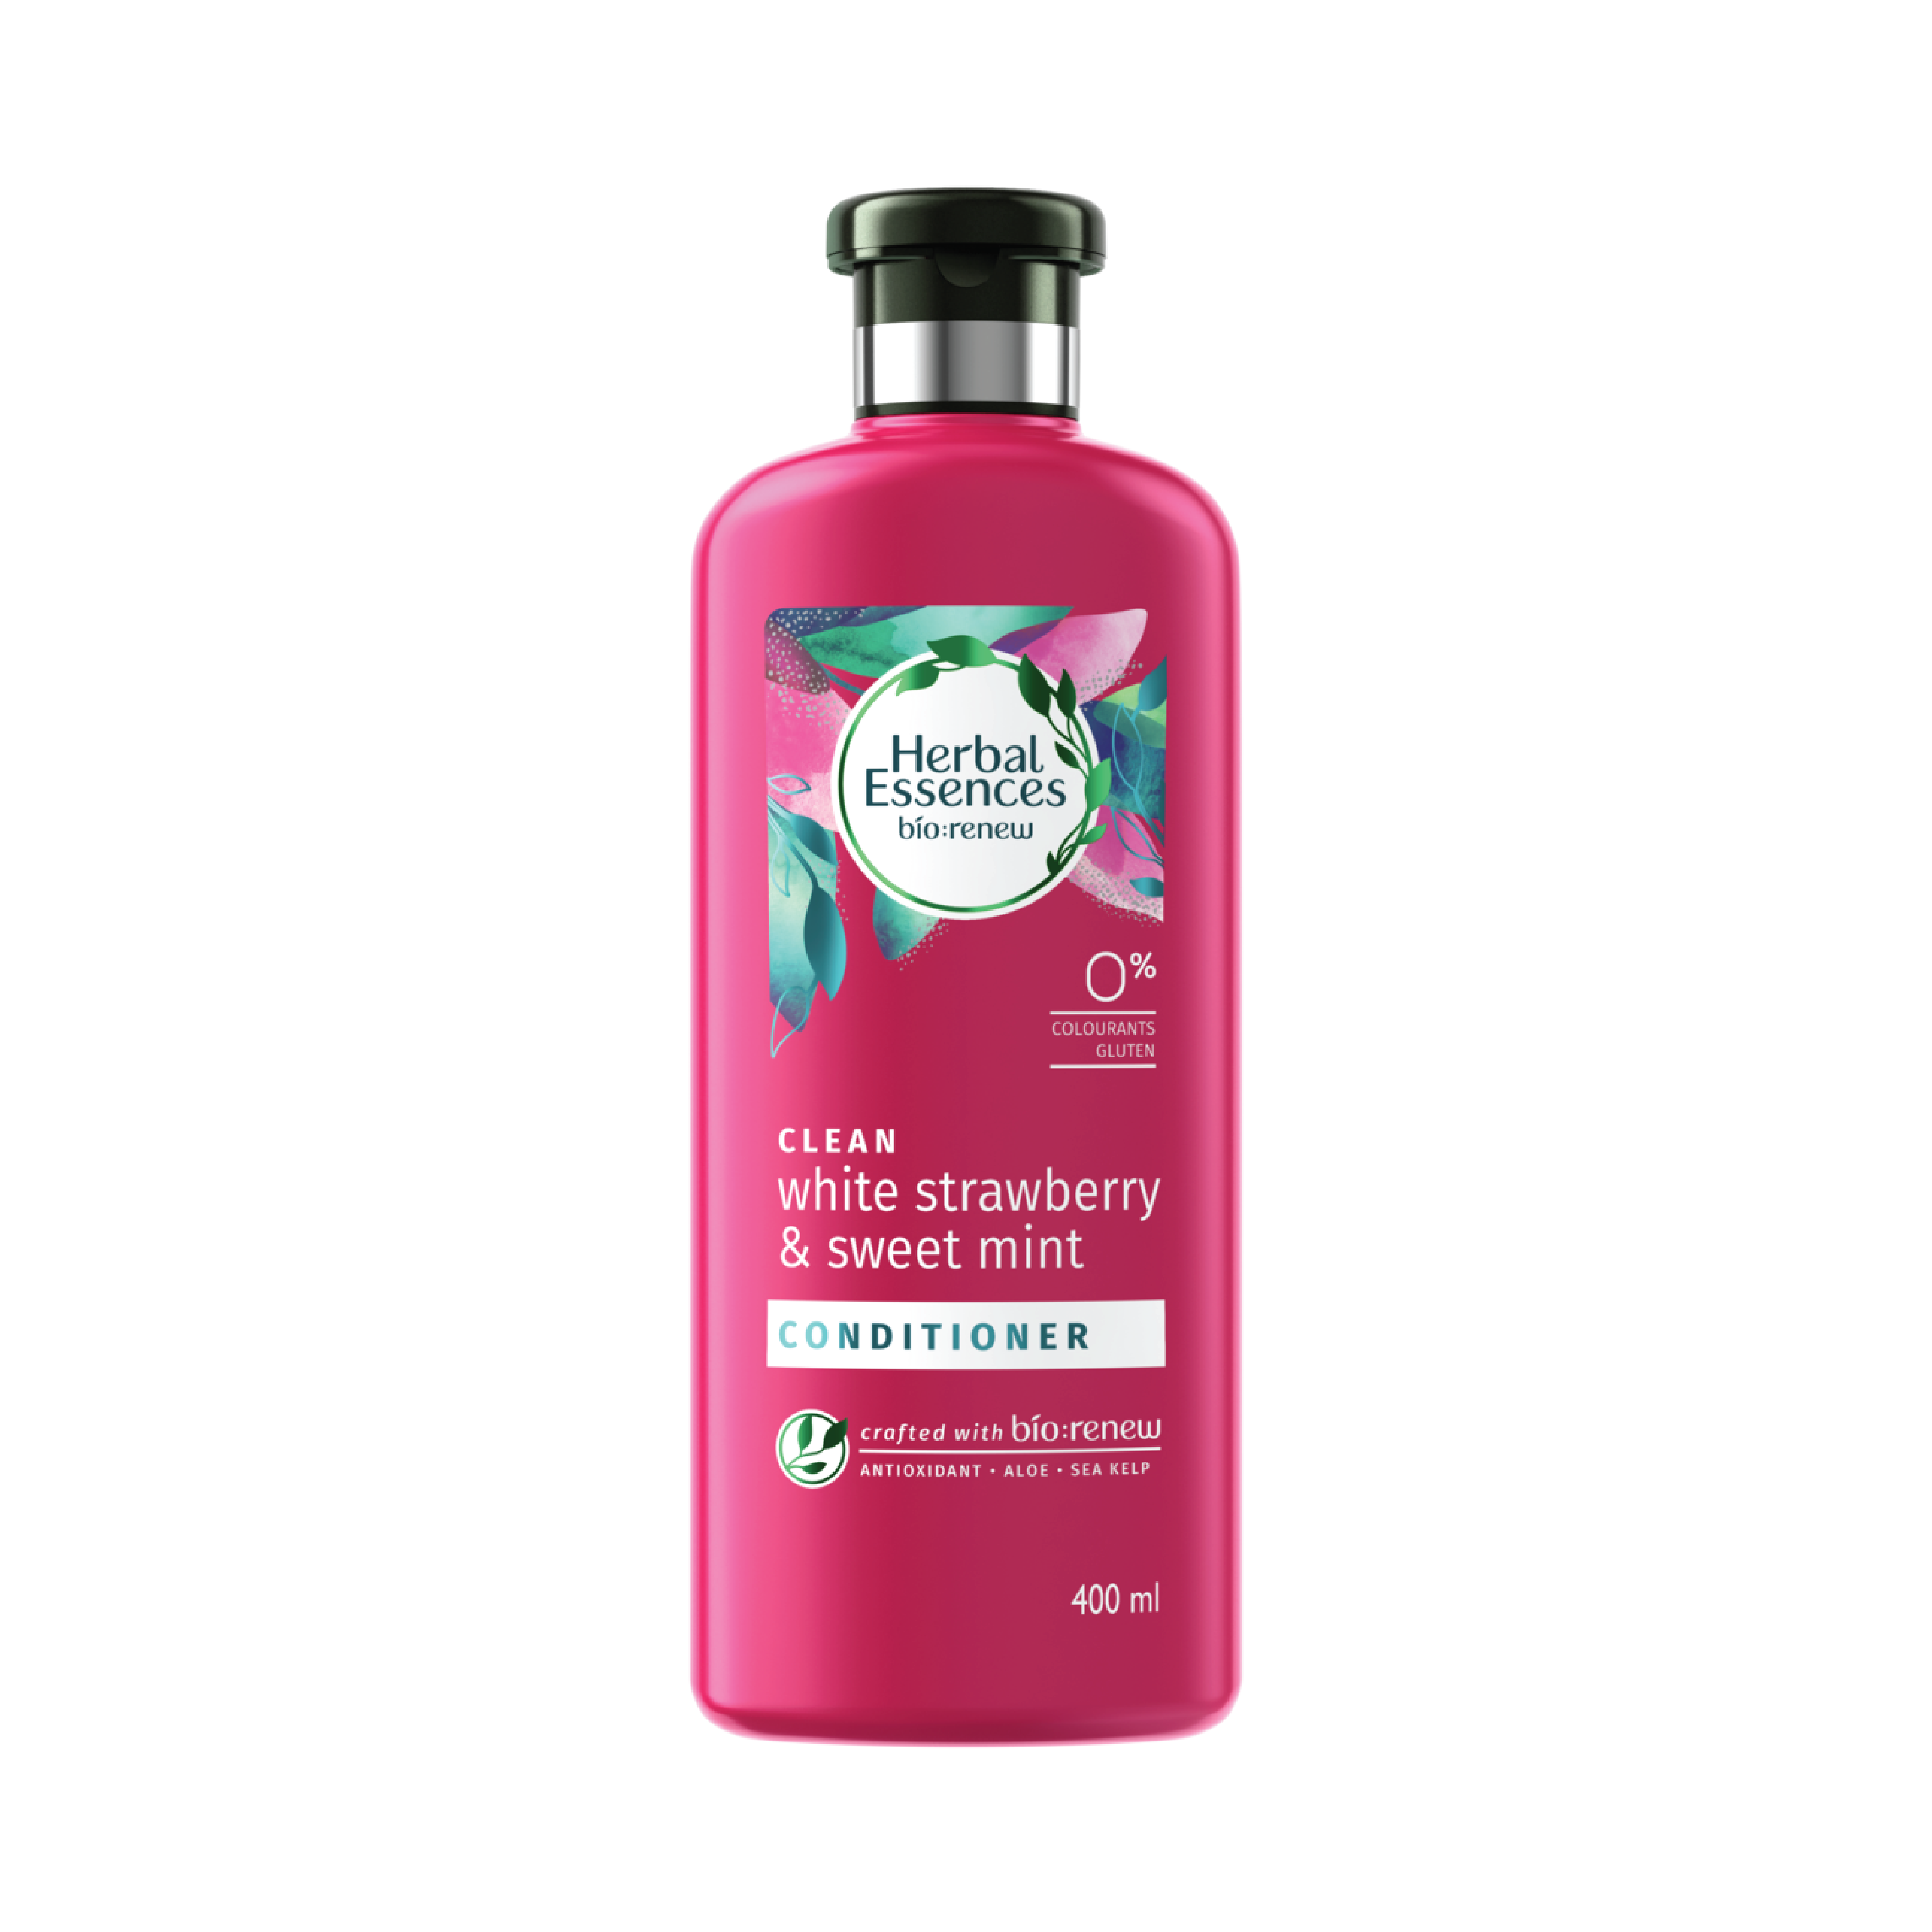 Herbal Essences Shampoo & Conditioner New Year Gift Pack